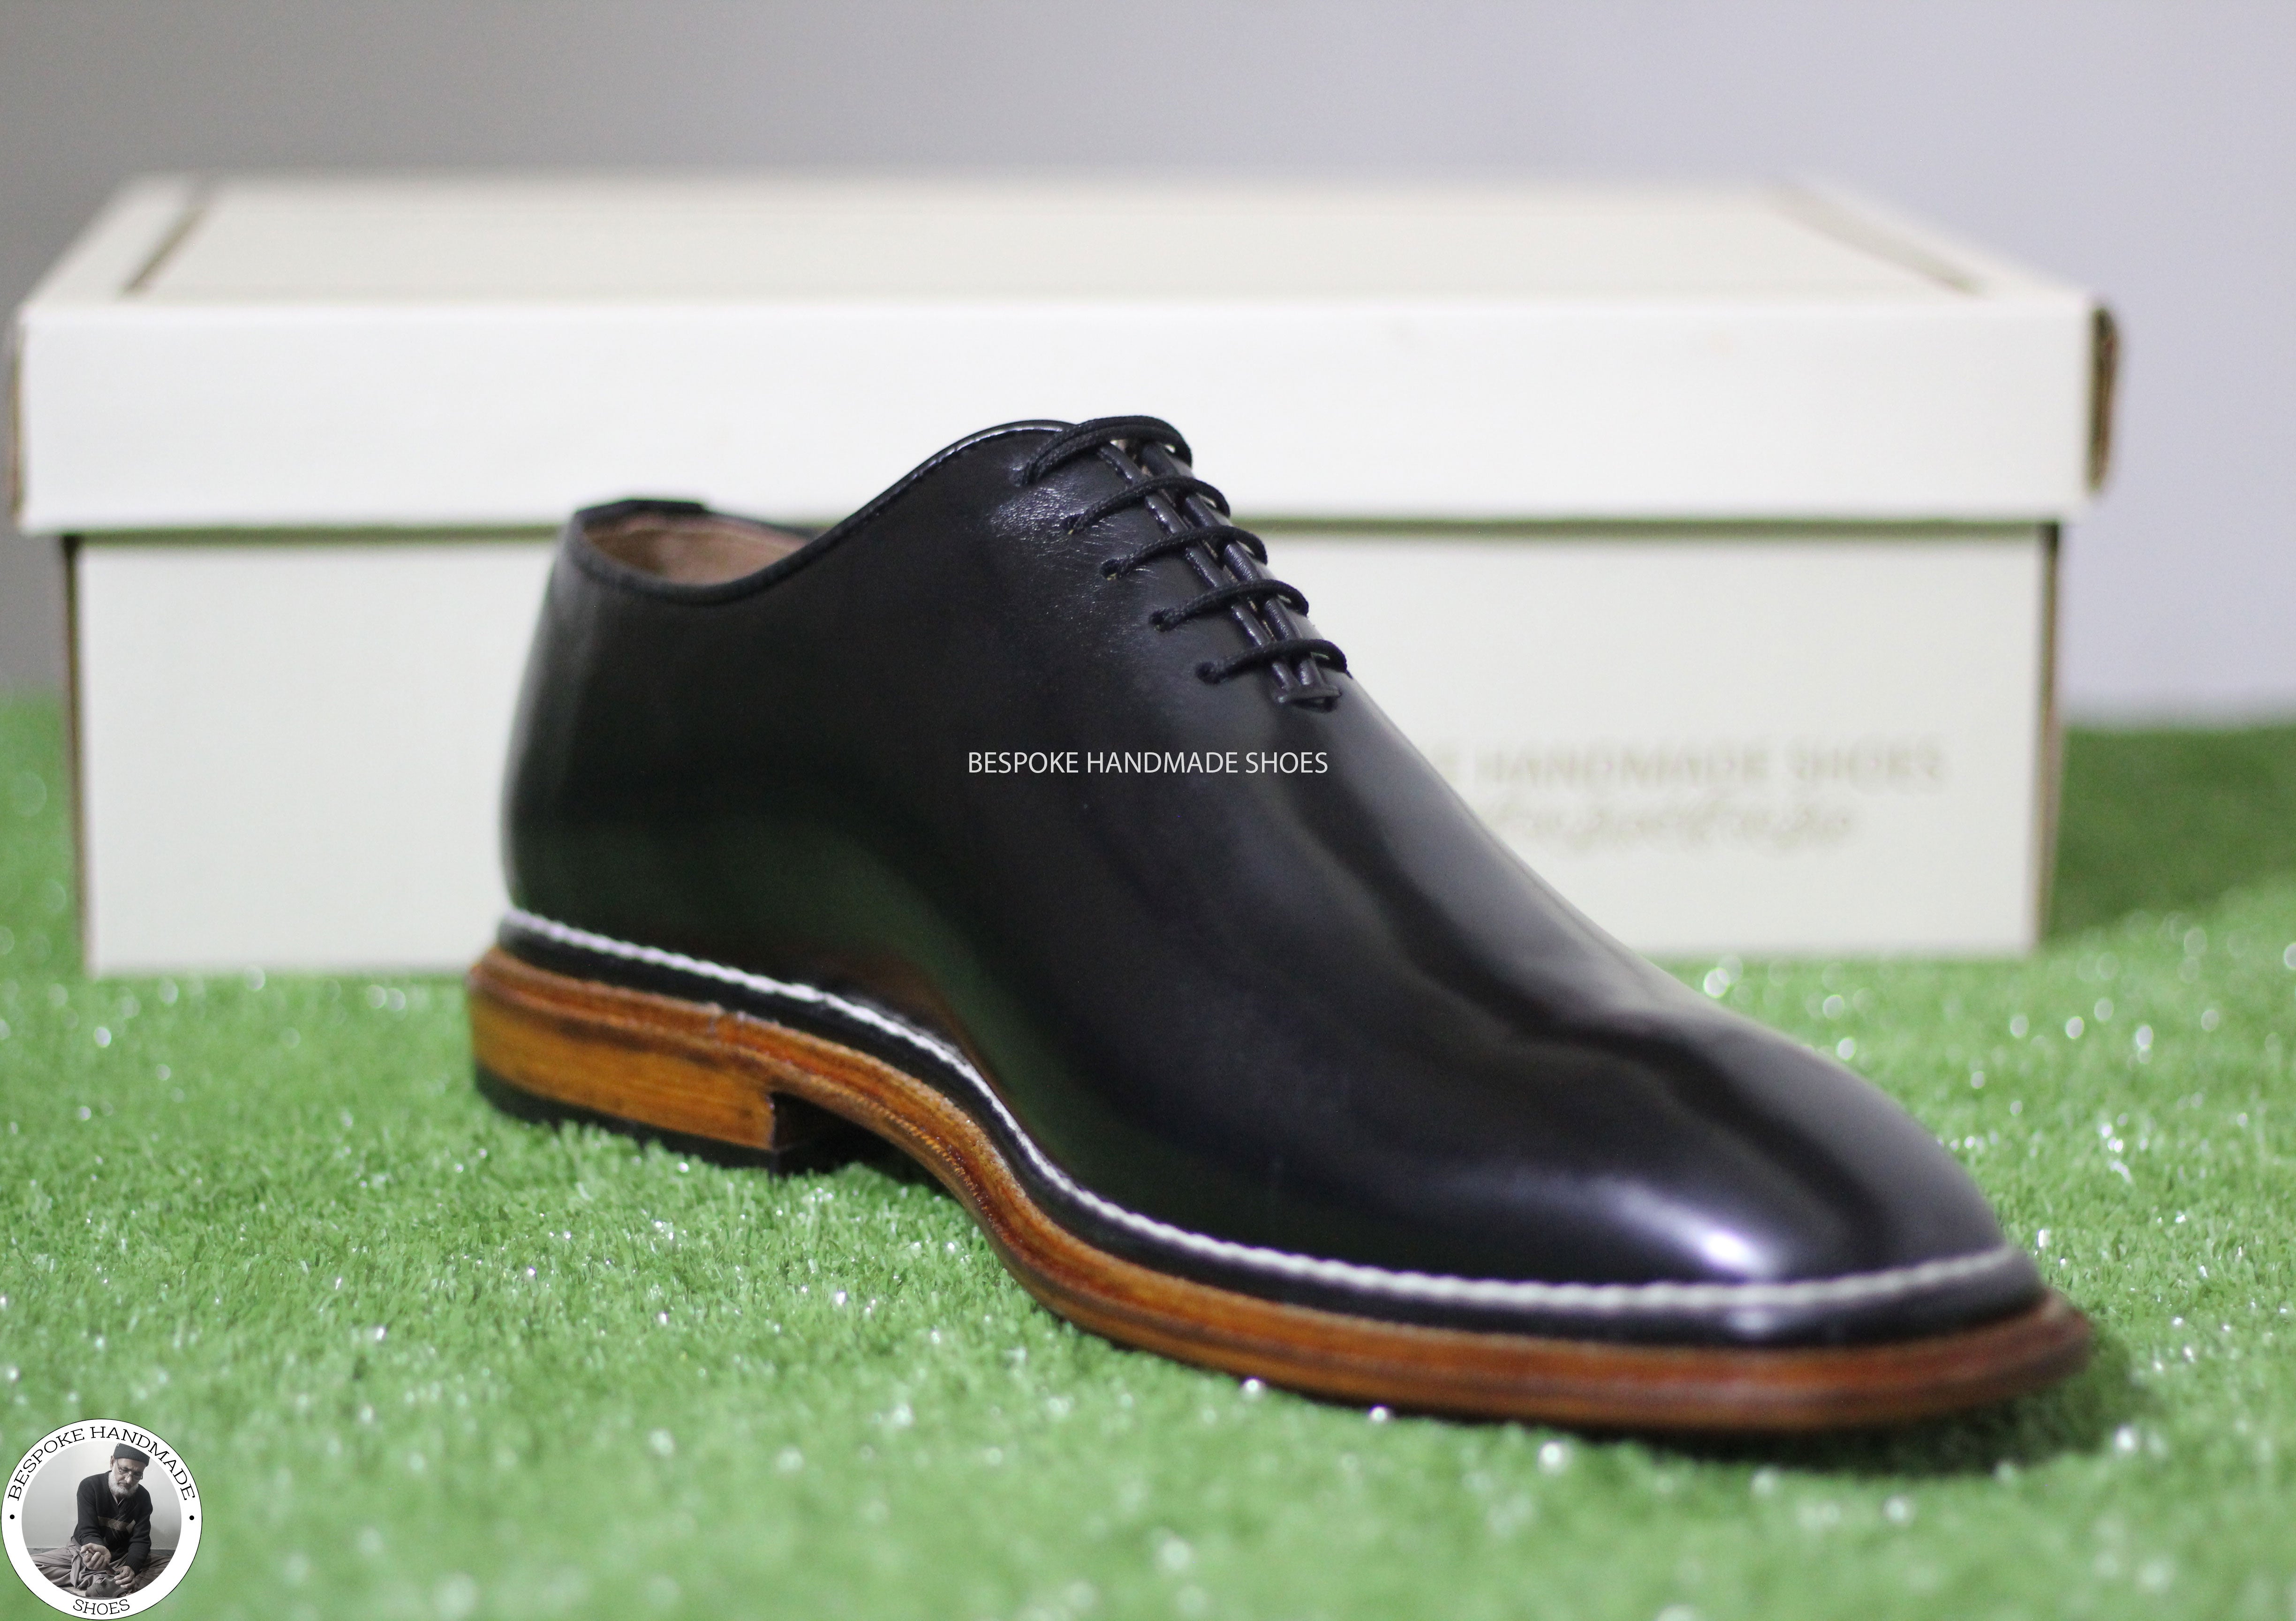 Bespoke Men's Black Leather Oxford Whole Cut Lace Up Formal / Casual Dress White Stitching Shoes